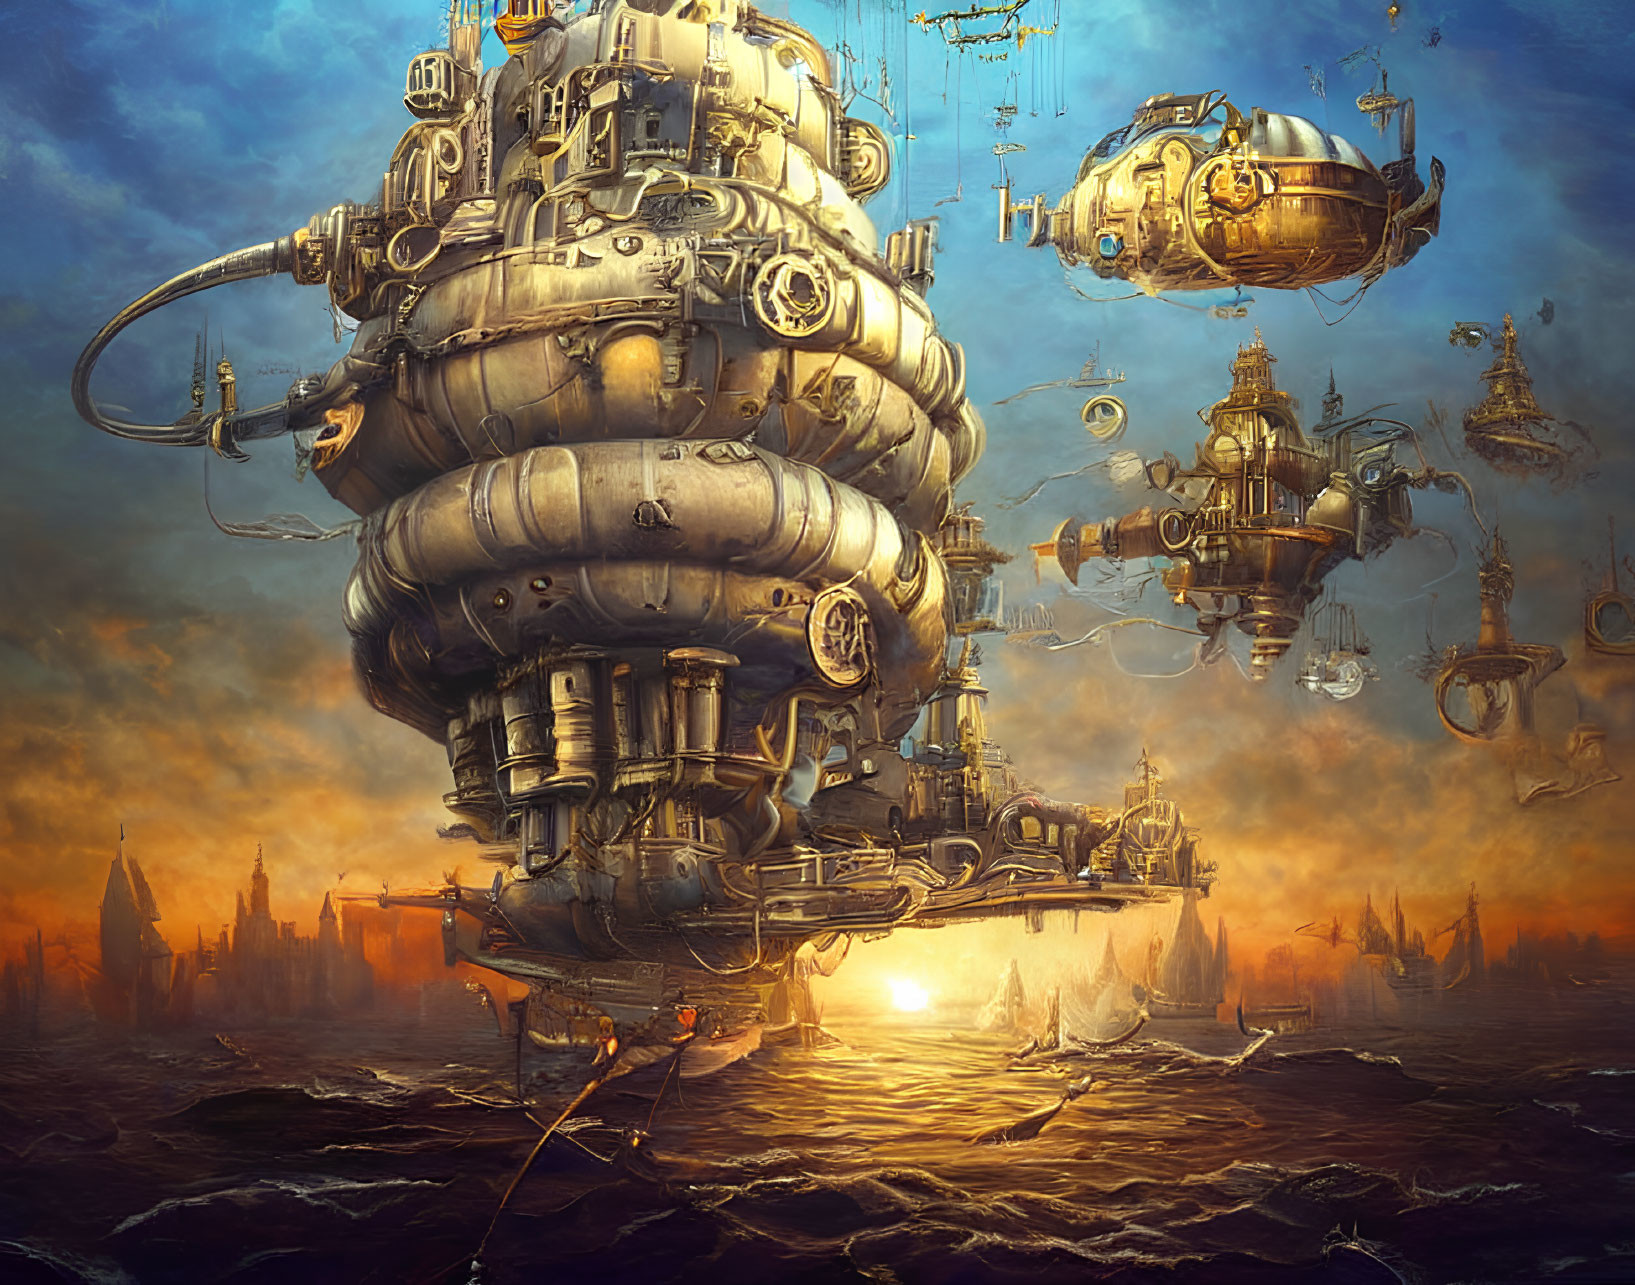 Steampunk city floating above fiery ocean with airships and dramatic sky